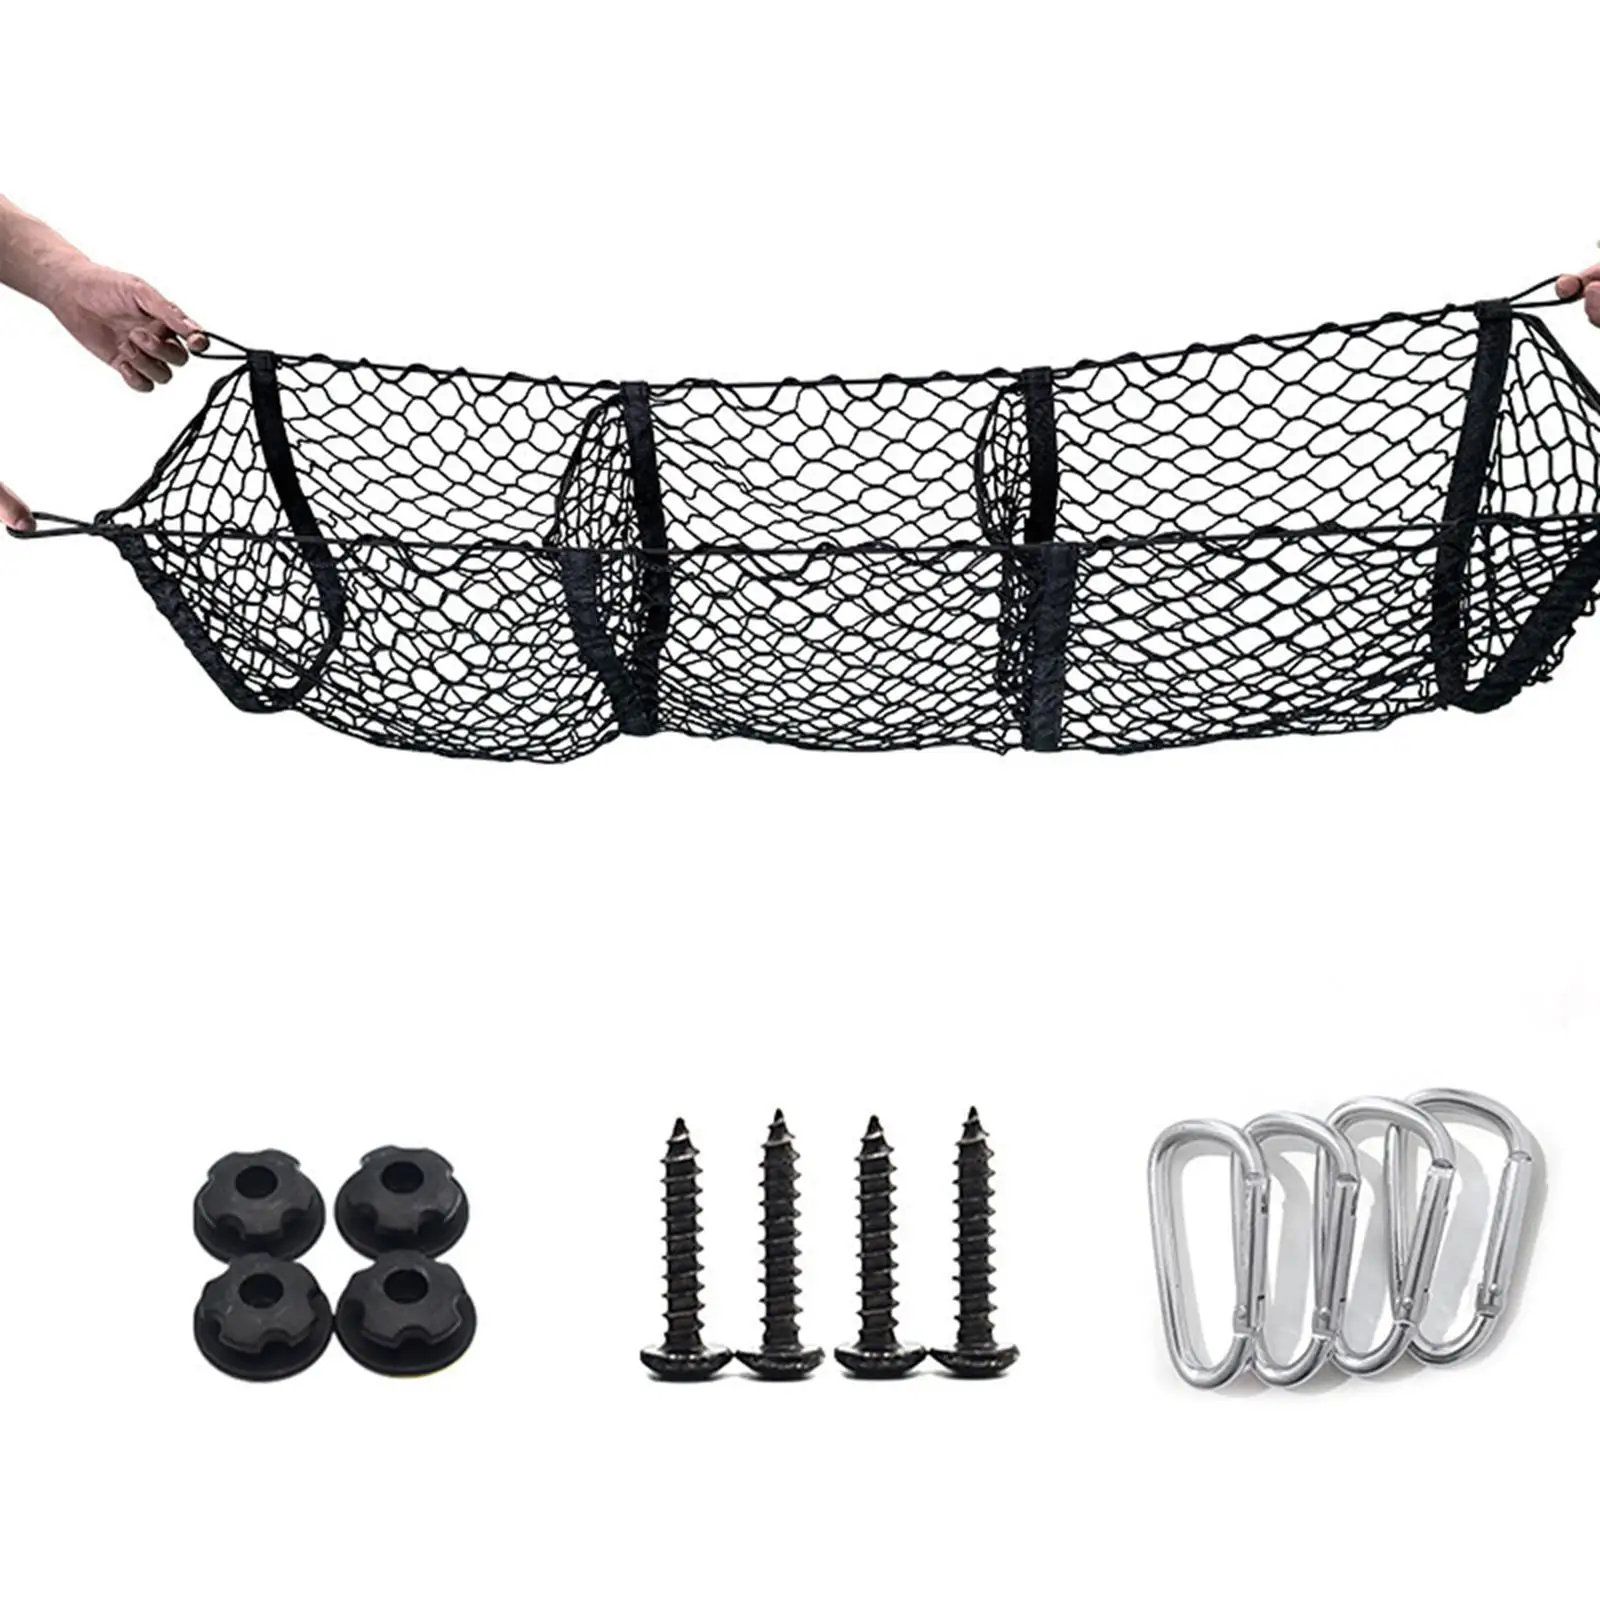 net bag Accessories elastic Stretchable with 4 Hook Reusable Storage Organizer Holder for SUV Trucks